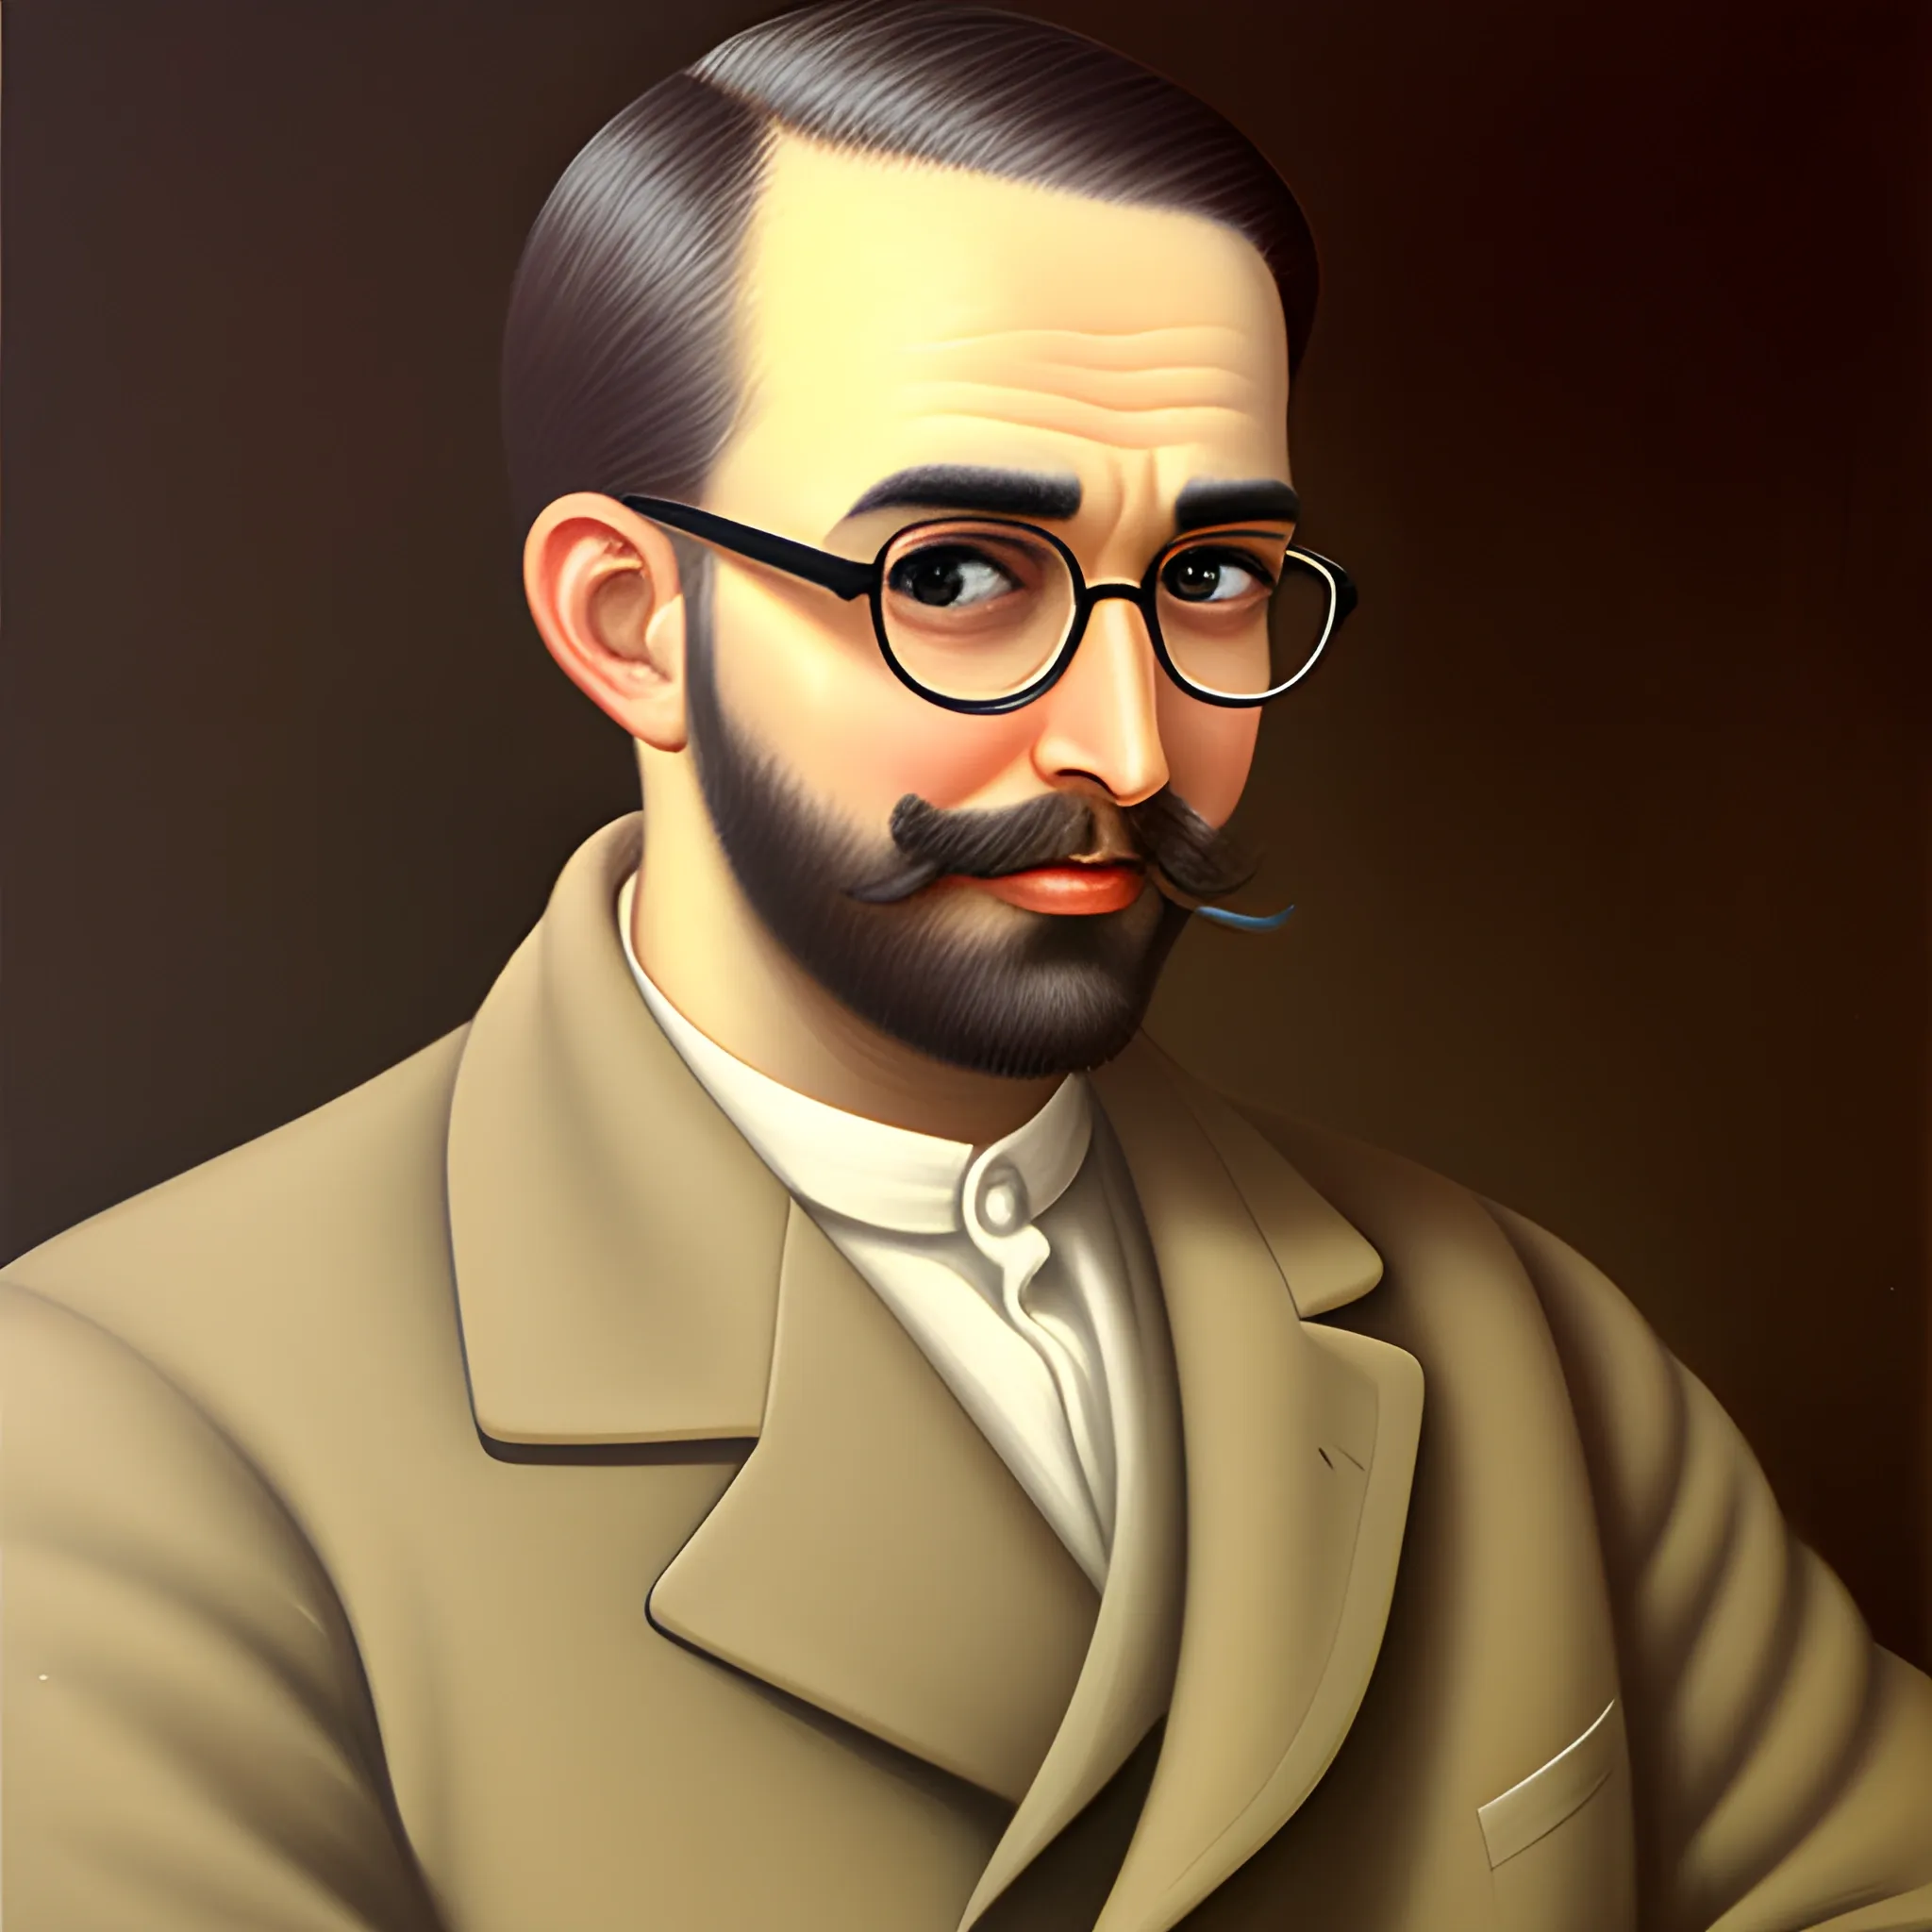 man with glasses without beard by Cartoon, Oil Painting